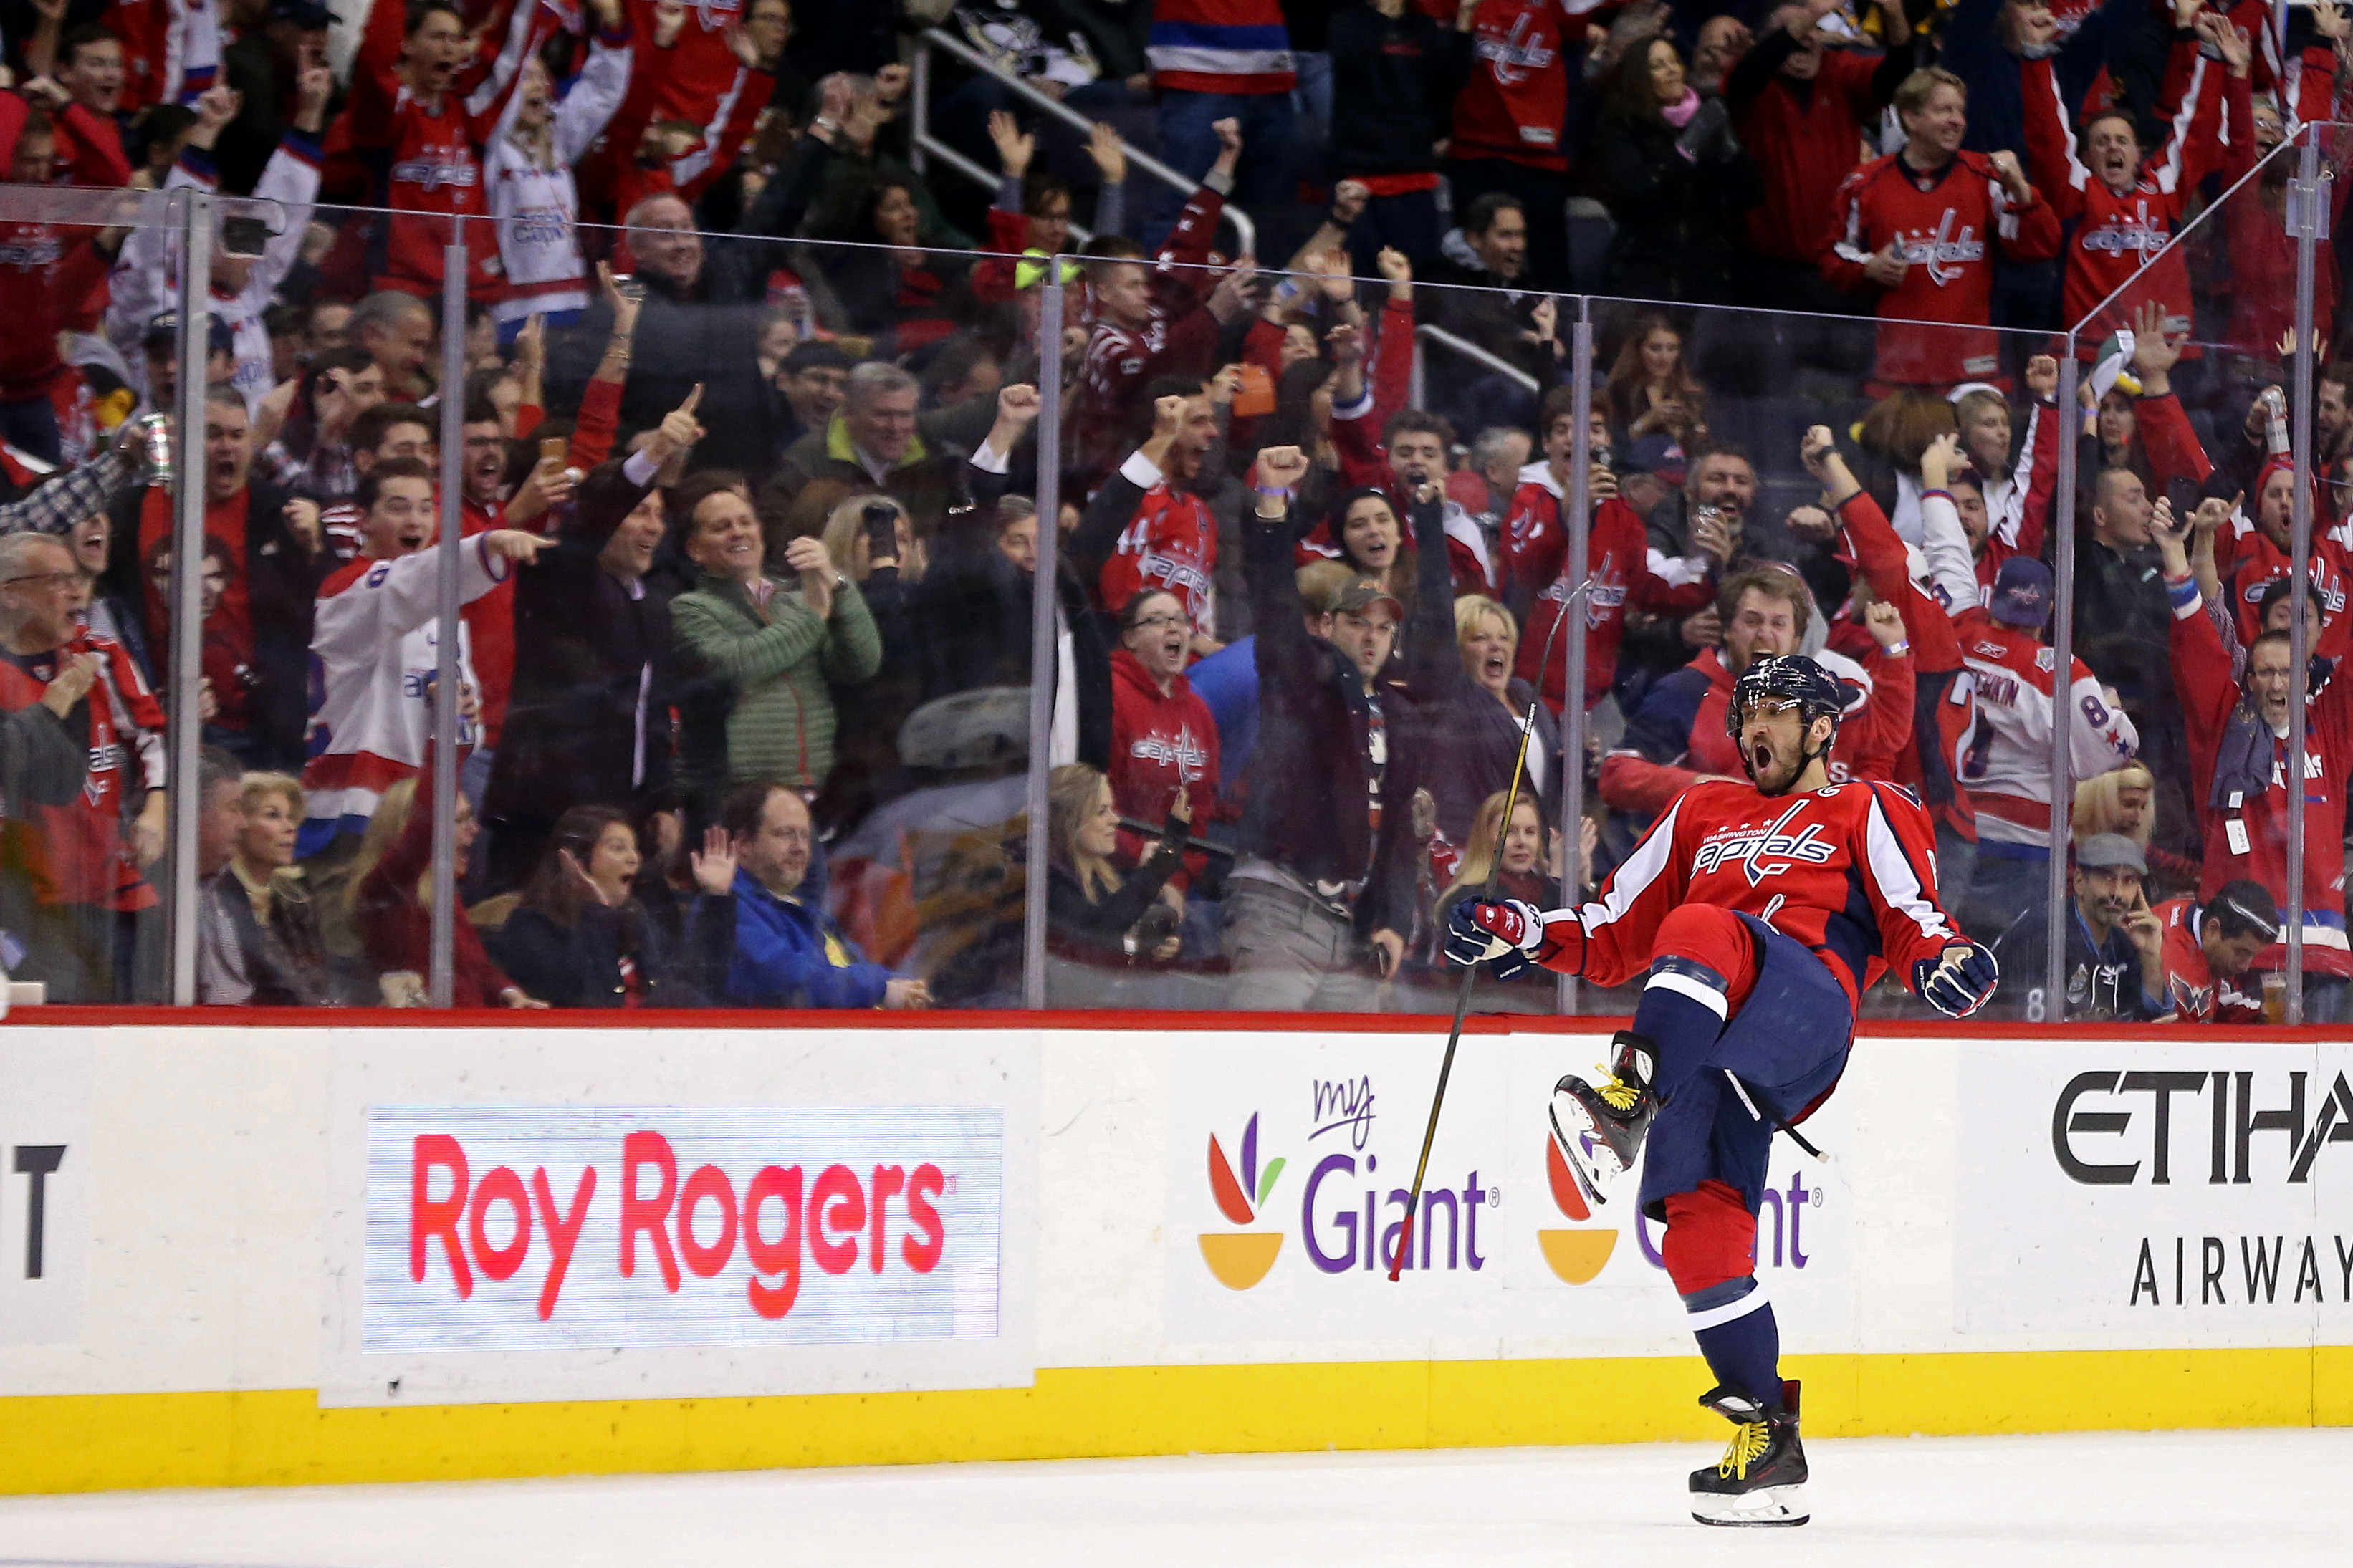 Alex Ovechkin to Play in 1,000th Game Tonight